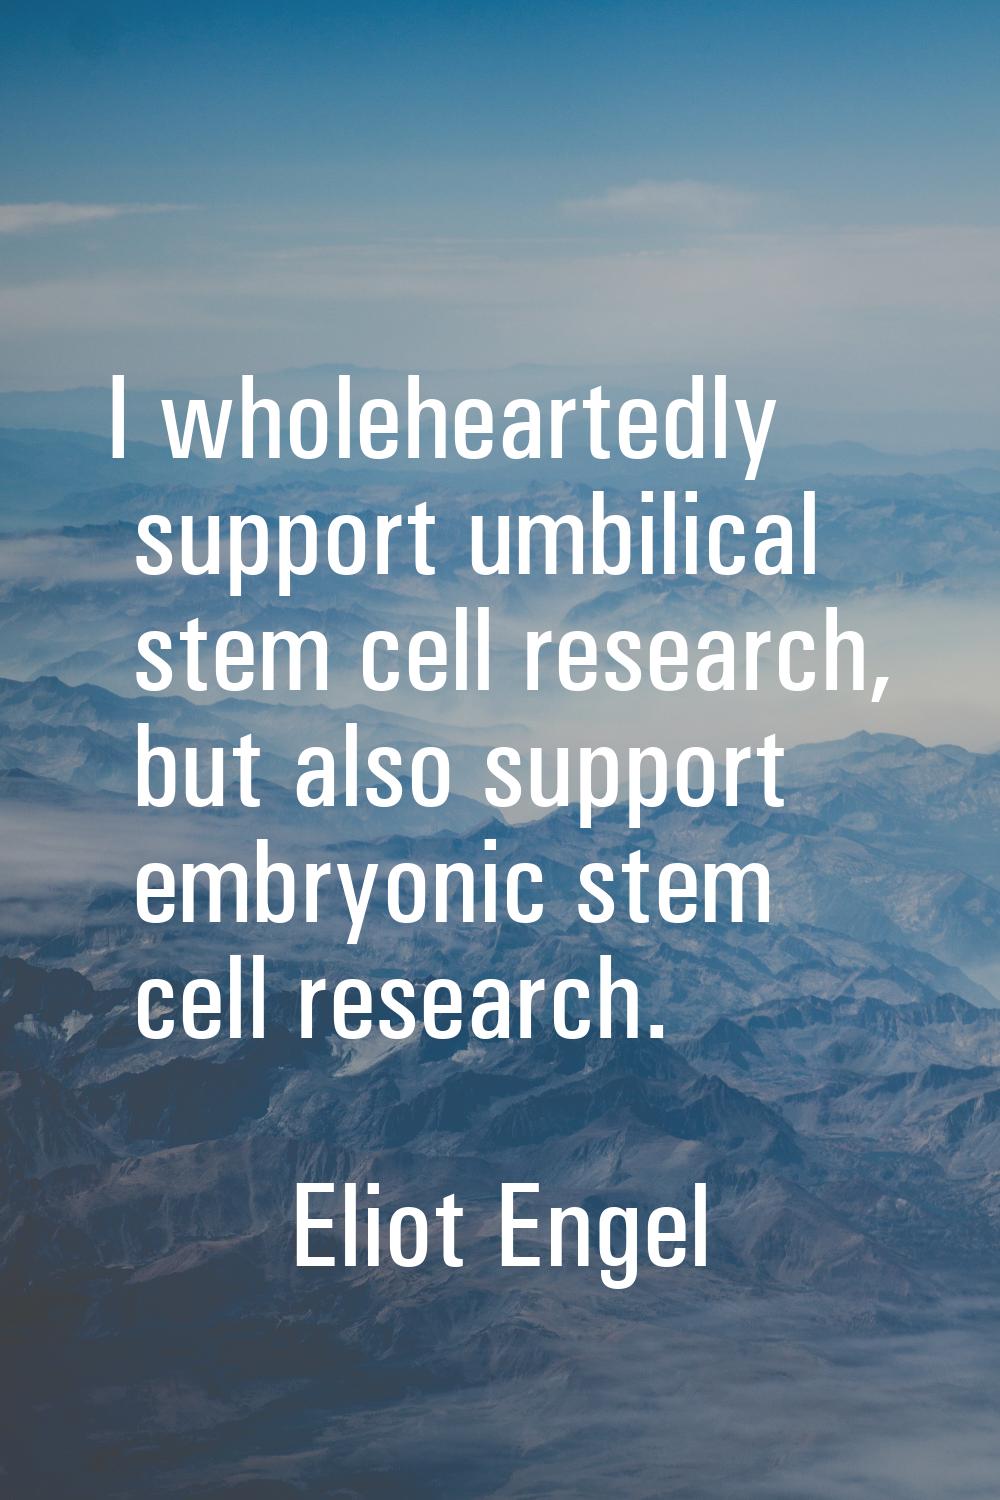 I wholeheartedly support umbilical stem cell research, but also support embryonic stem cell researc